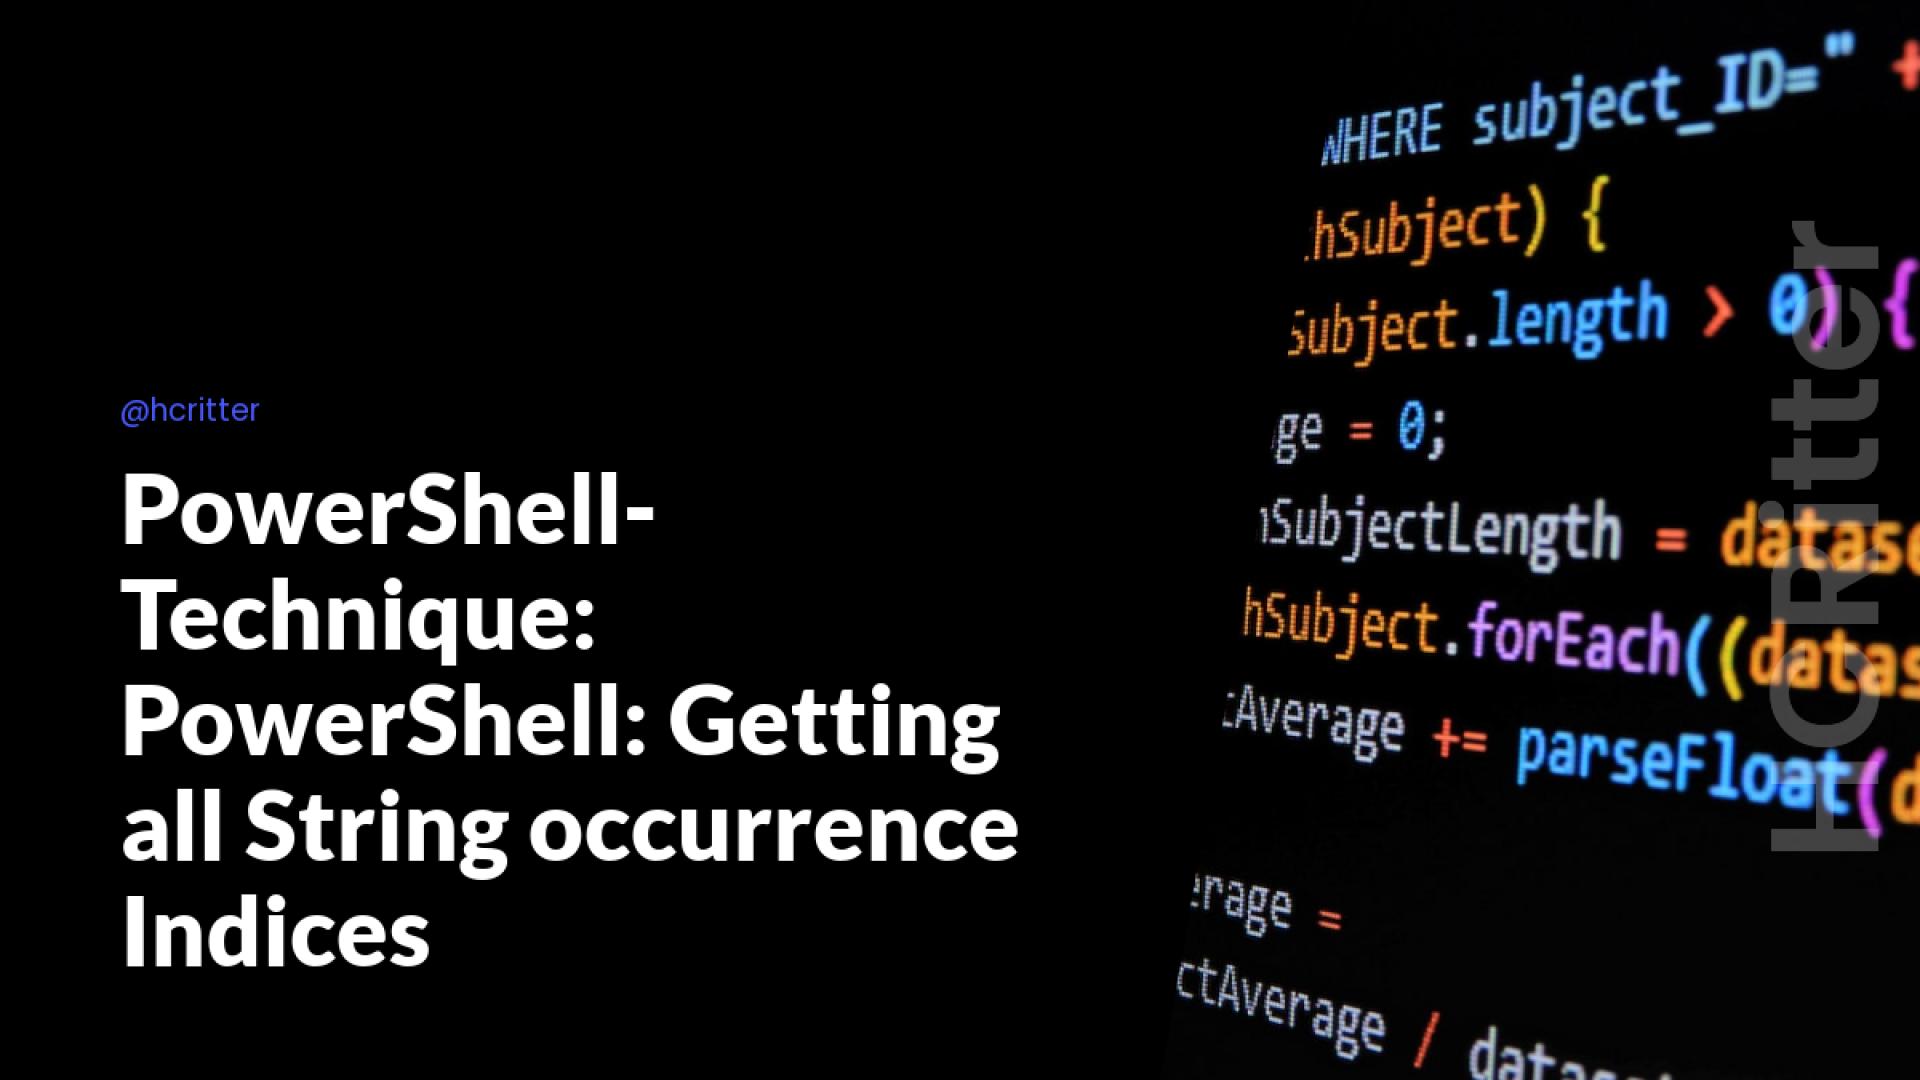 PowerShell-Technique: PowerShell: Getting all String occurrence Indices